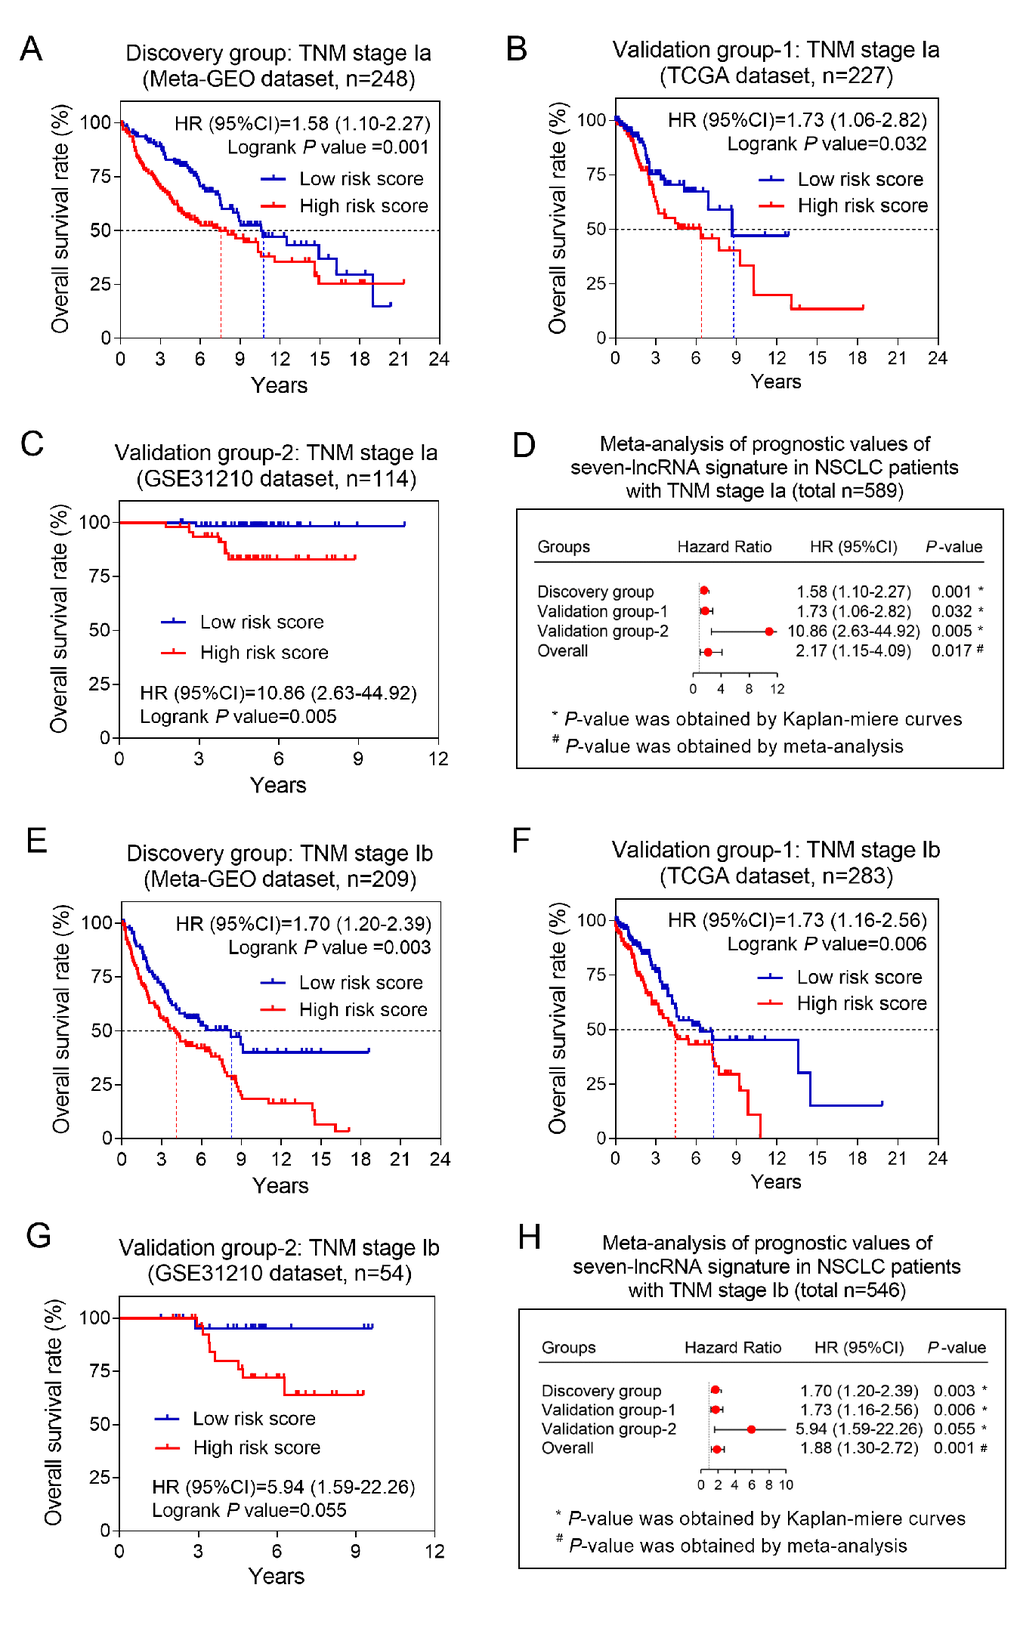 The association between seven-lncRNA signature and overall survival in patients with stage I. The Kaplan-Meier survival curves of discovery group (A), validation group-1 (B) and validation group-2 (C) were plotted, and meta-analysis (D) was conducted in patients with stage Ia. The similar results were obtained from the patients with stage Ib in discovery group (E), validation group-1 (F) and validation group-2 (G), and the prognostic meta-analysis (H) was also conducted.